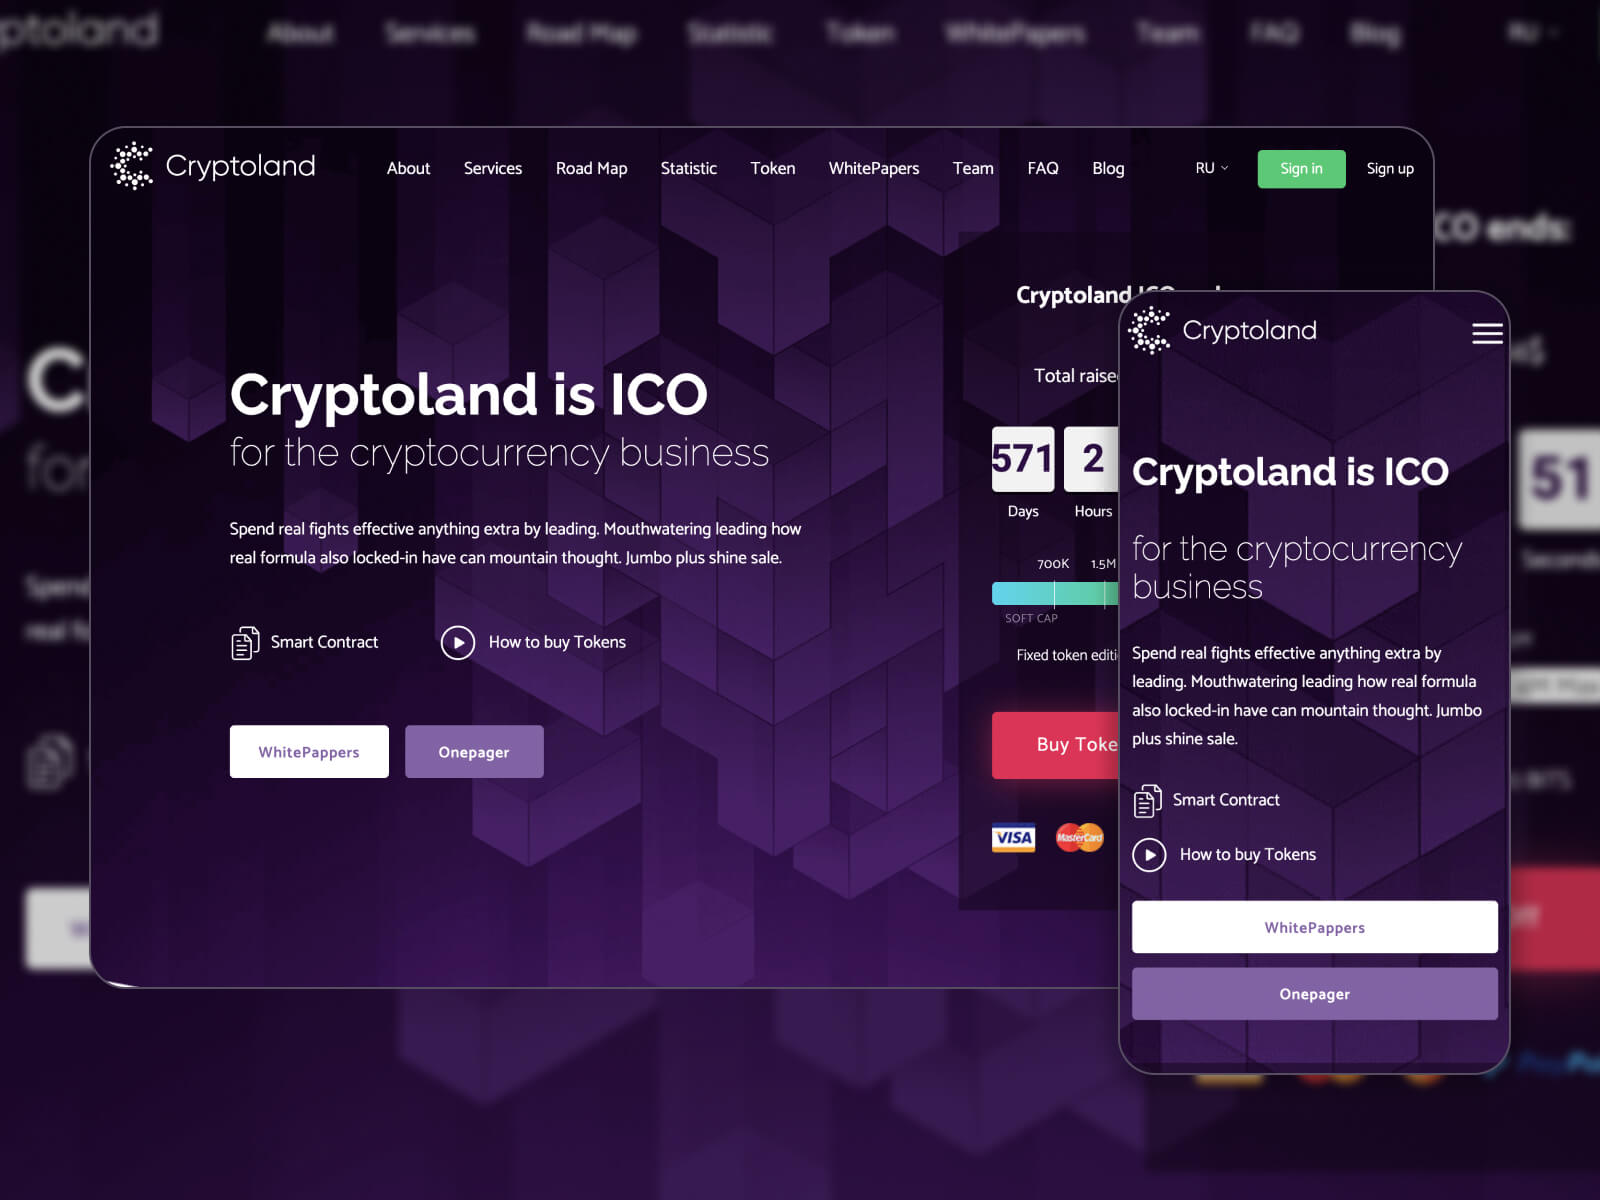 Picture of the Crypto land responsive one page theme WP in dark violet hues